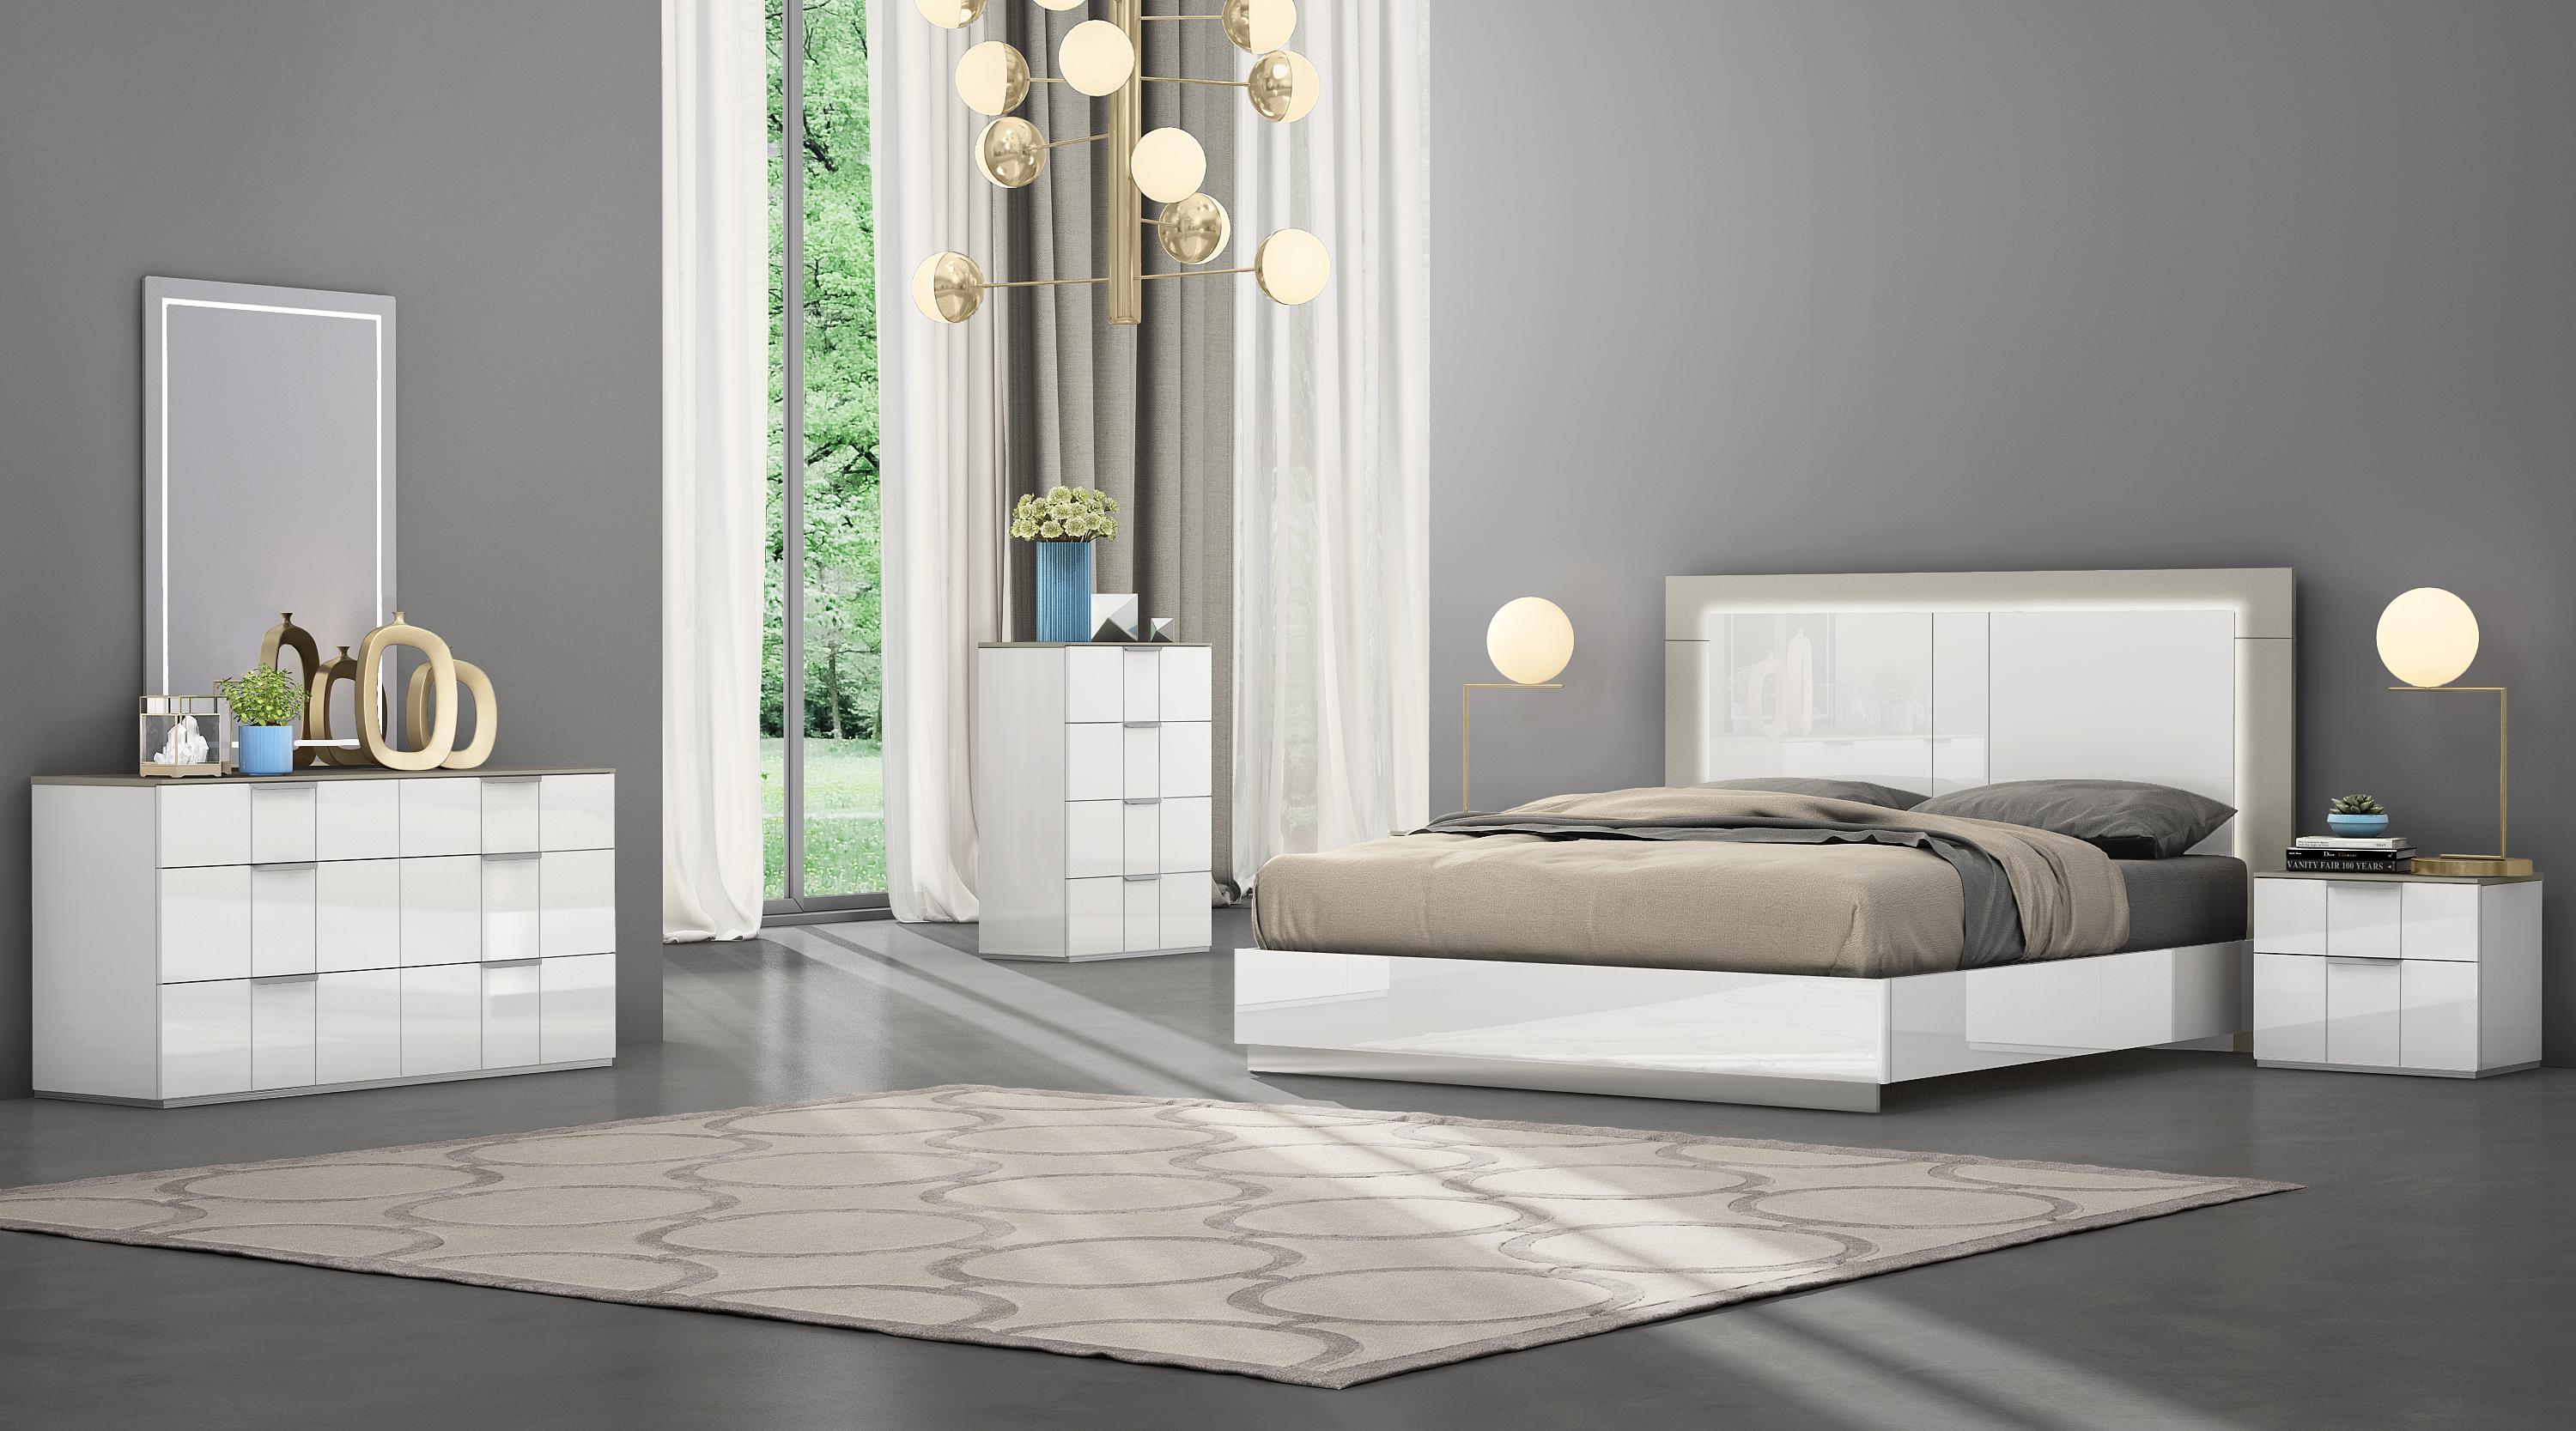 

    
Contemporary High Gloss White Solid Wood Queen Bedroom Set 5pcs WhiteLine BQ1723-WHT Daisy
